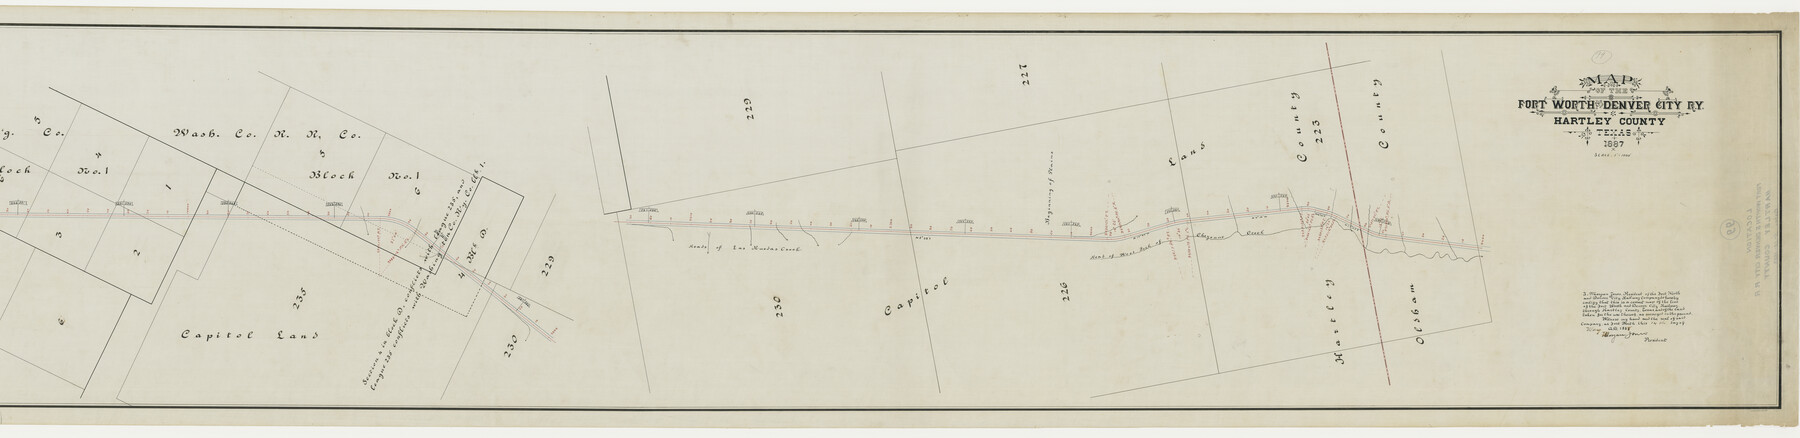 64390, Map of the Fort Worth & Denver City Railway, Hartley County, Texas, General Map Collection